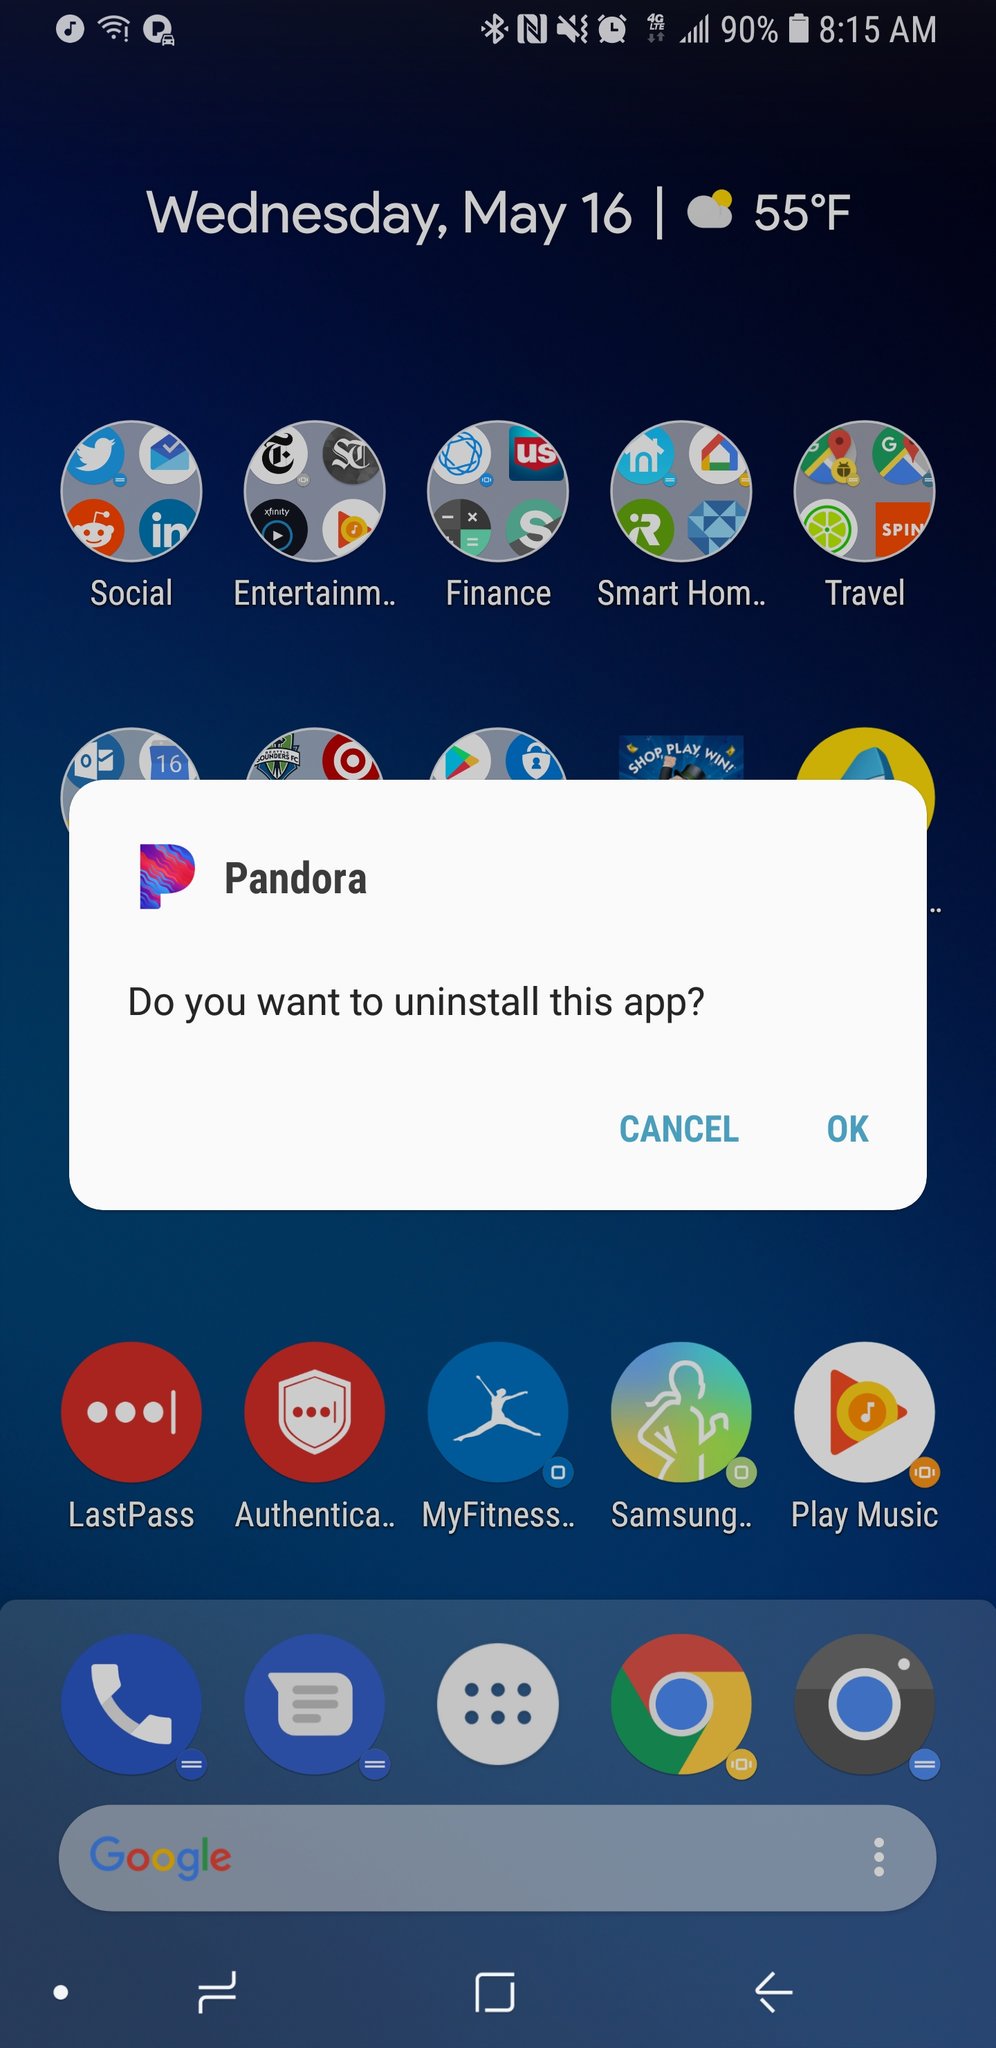 Pandora Support on Twitter: "@StumpToEmerald If you are using Oreo, this notification is a new requirement from Google with the Android Oreo update. The only way to this notification is by